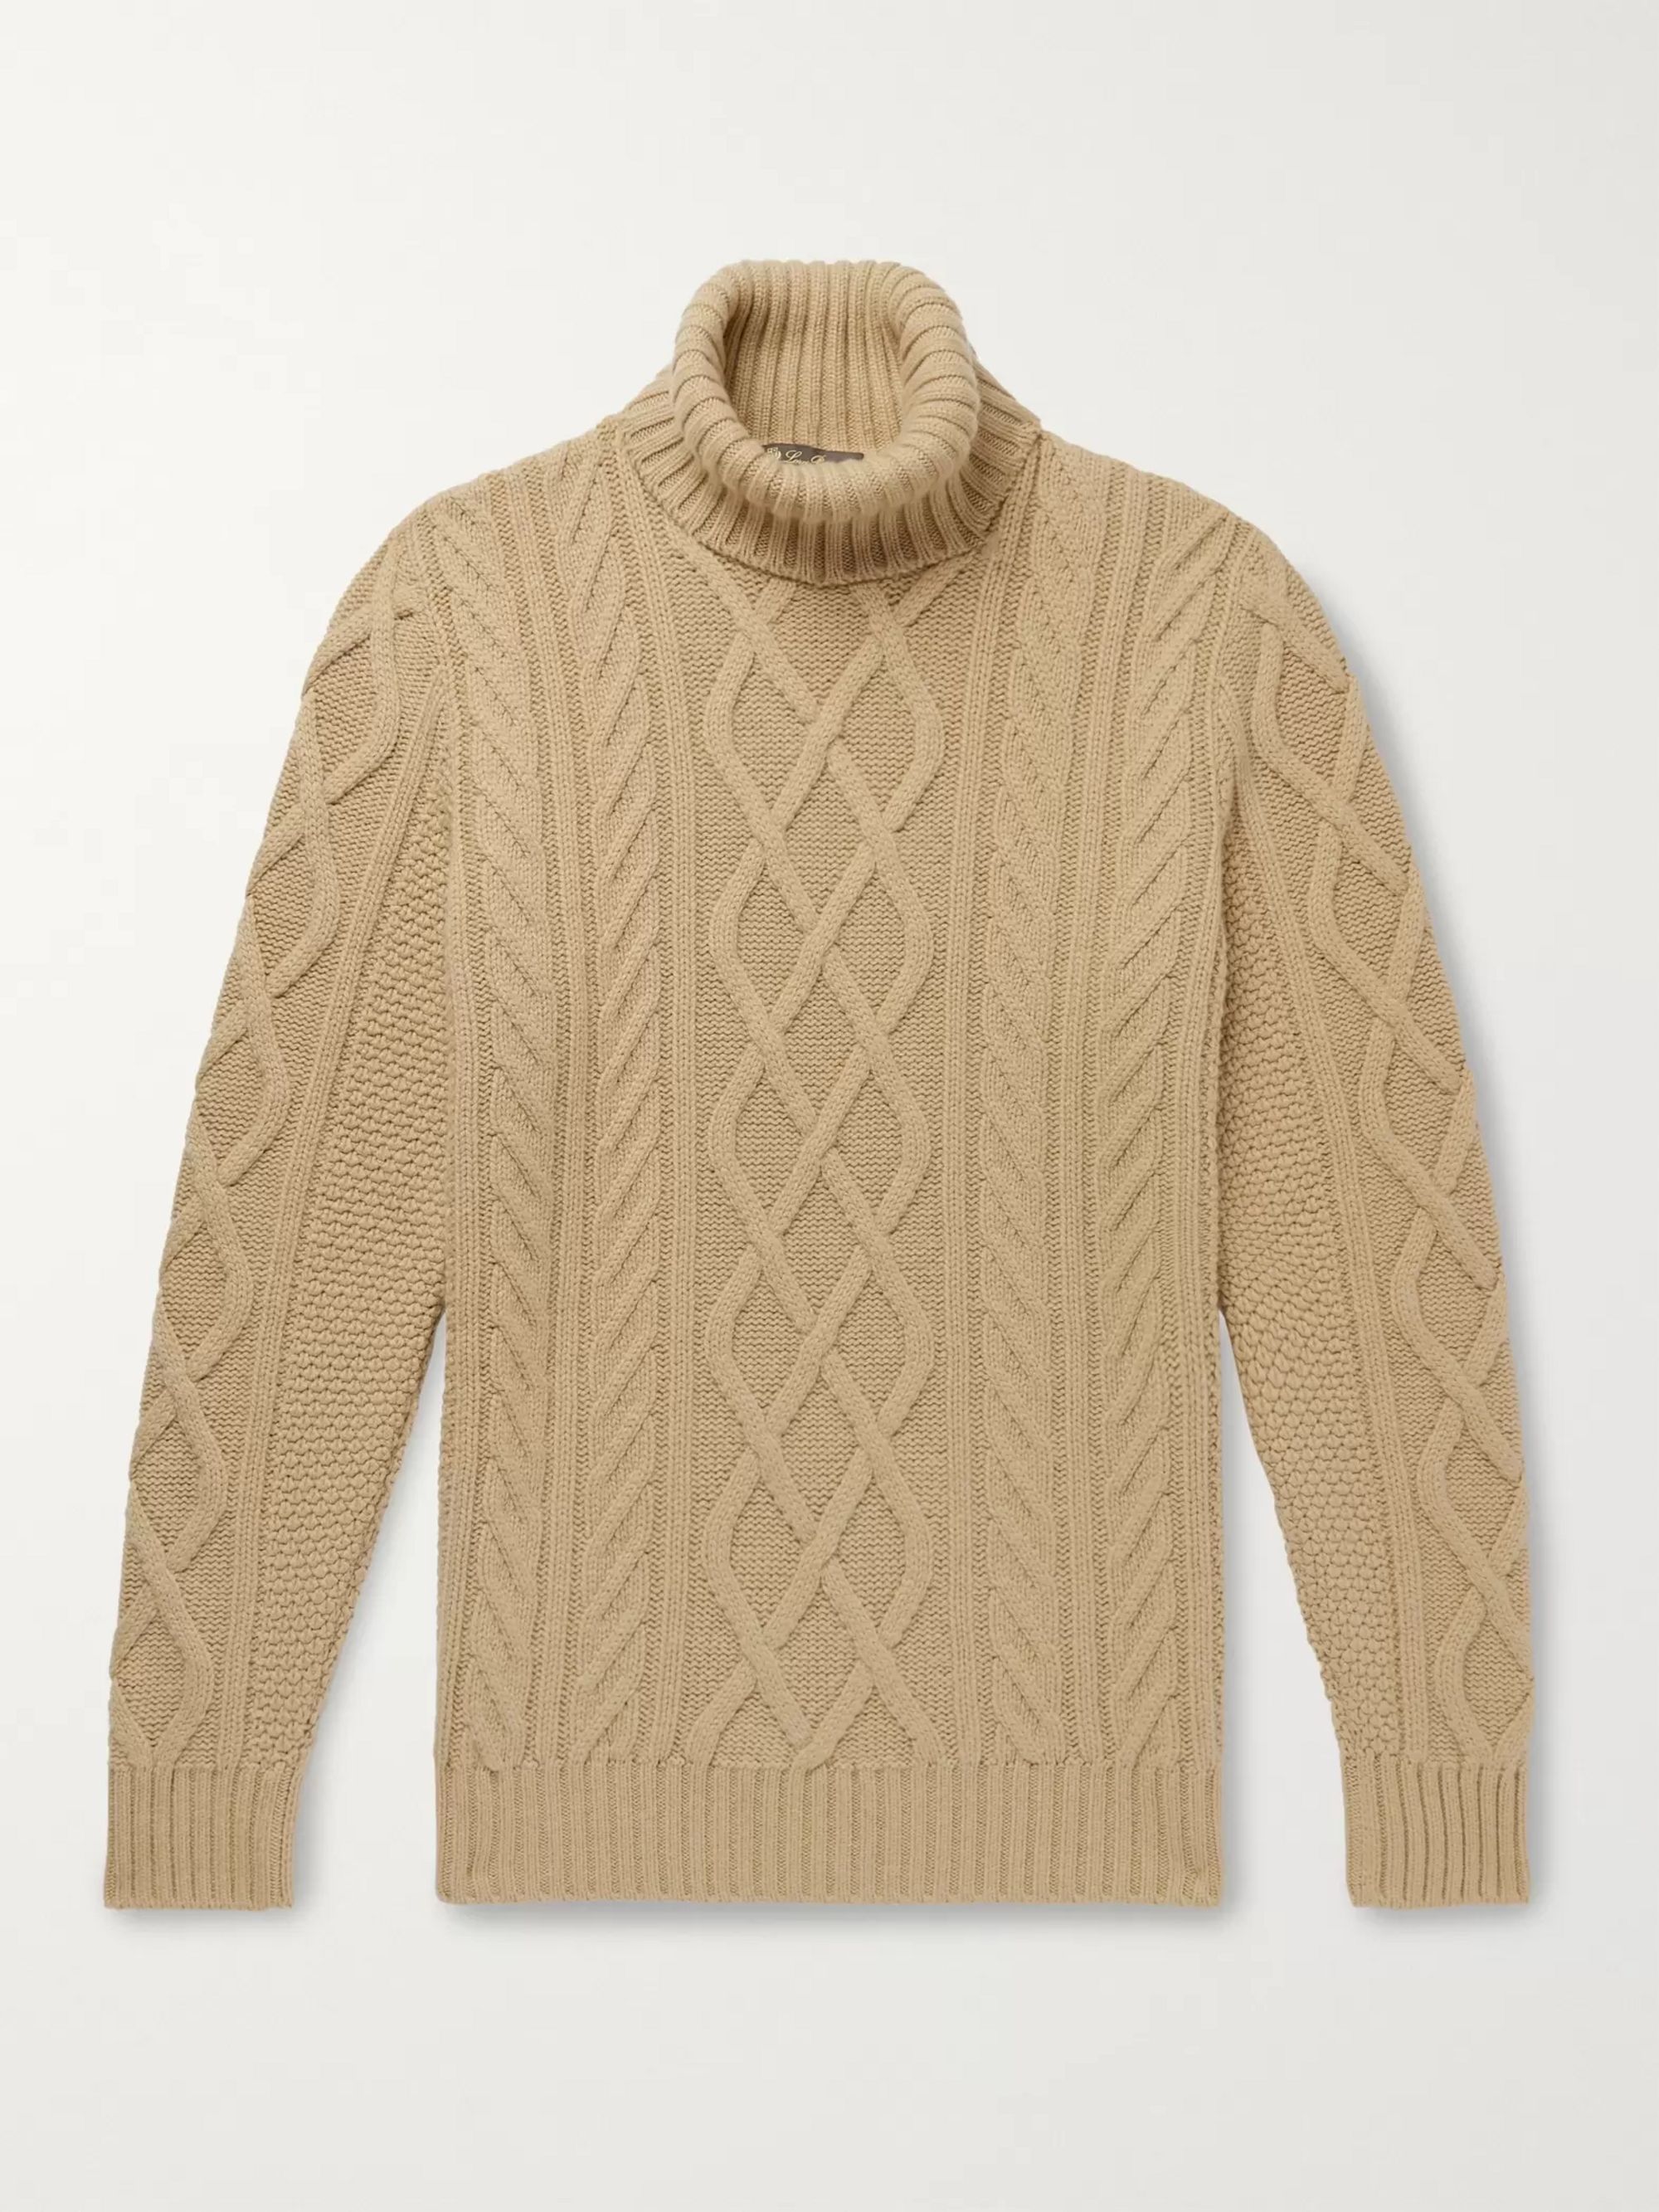 Tan Cable-Knit Baby Cashmere Rollneck Sweater | LORO PIANA | MR PORTER